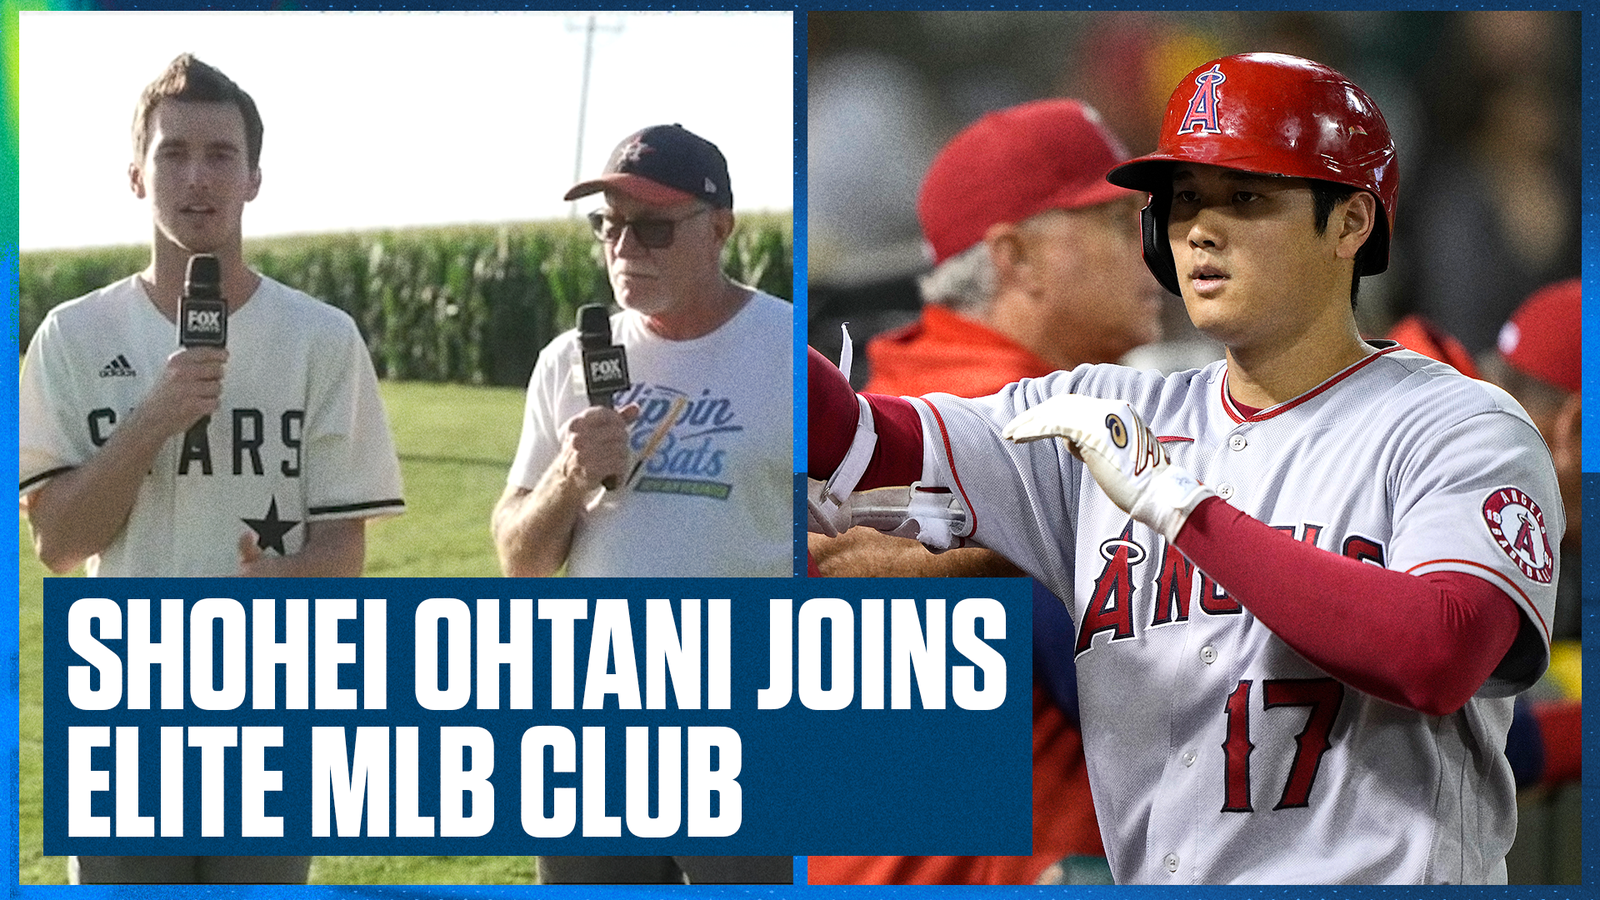 Angels' Shohei Ohtani joins Babe Ruth in exclusive club